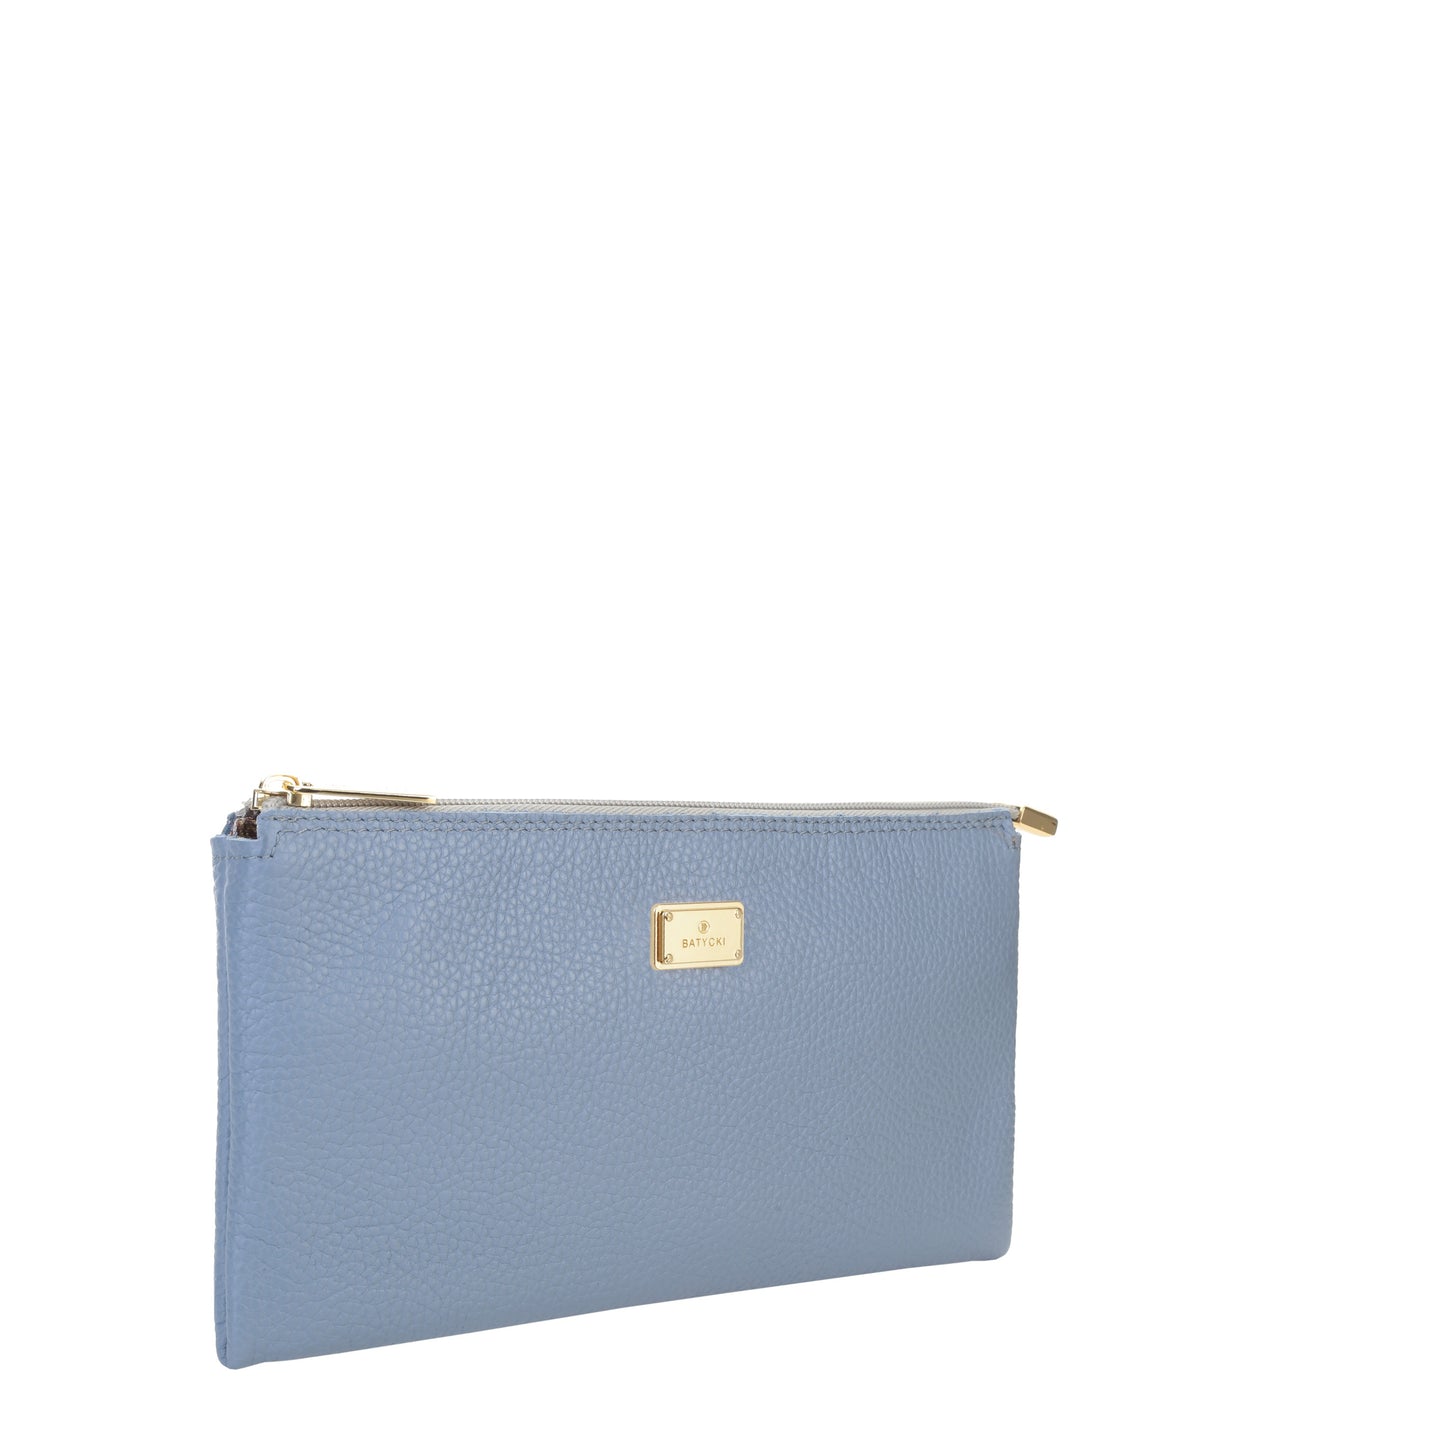 LEATHER COSMETIC BAG mousse blue